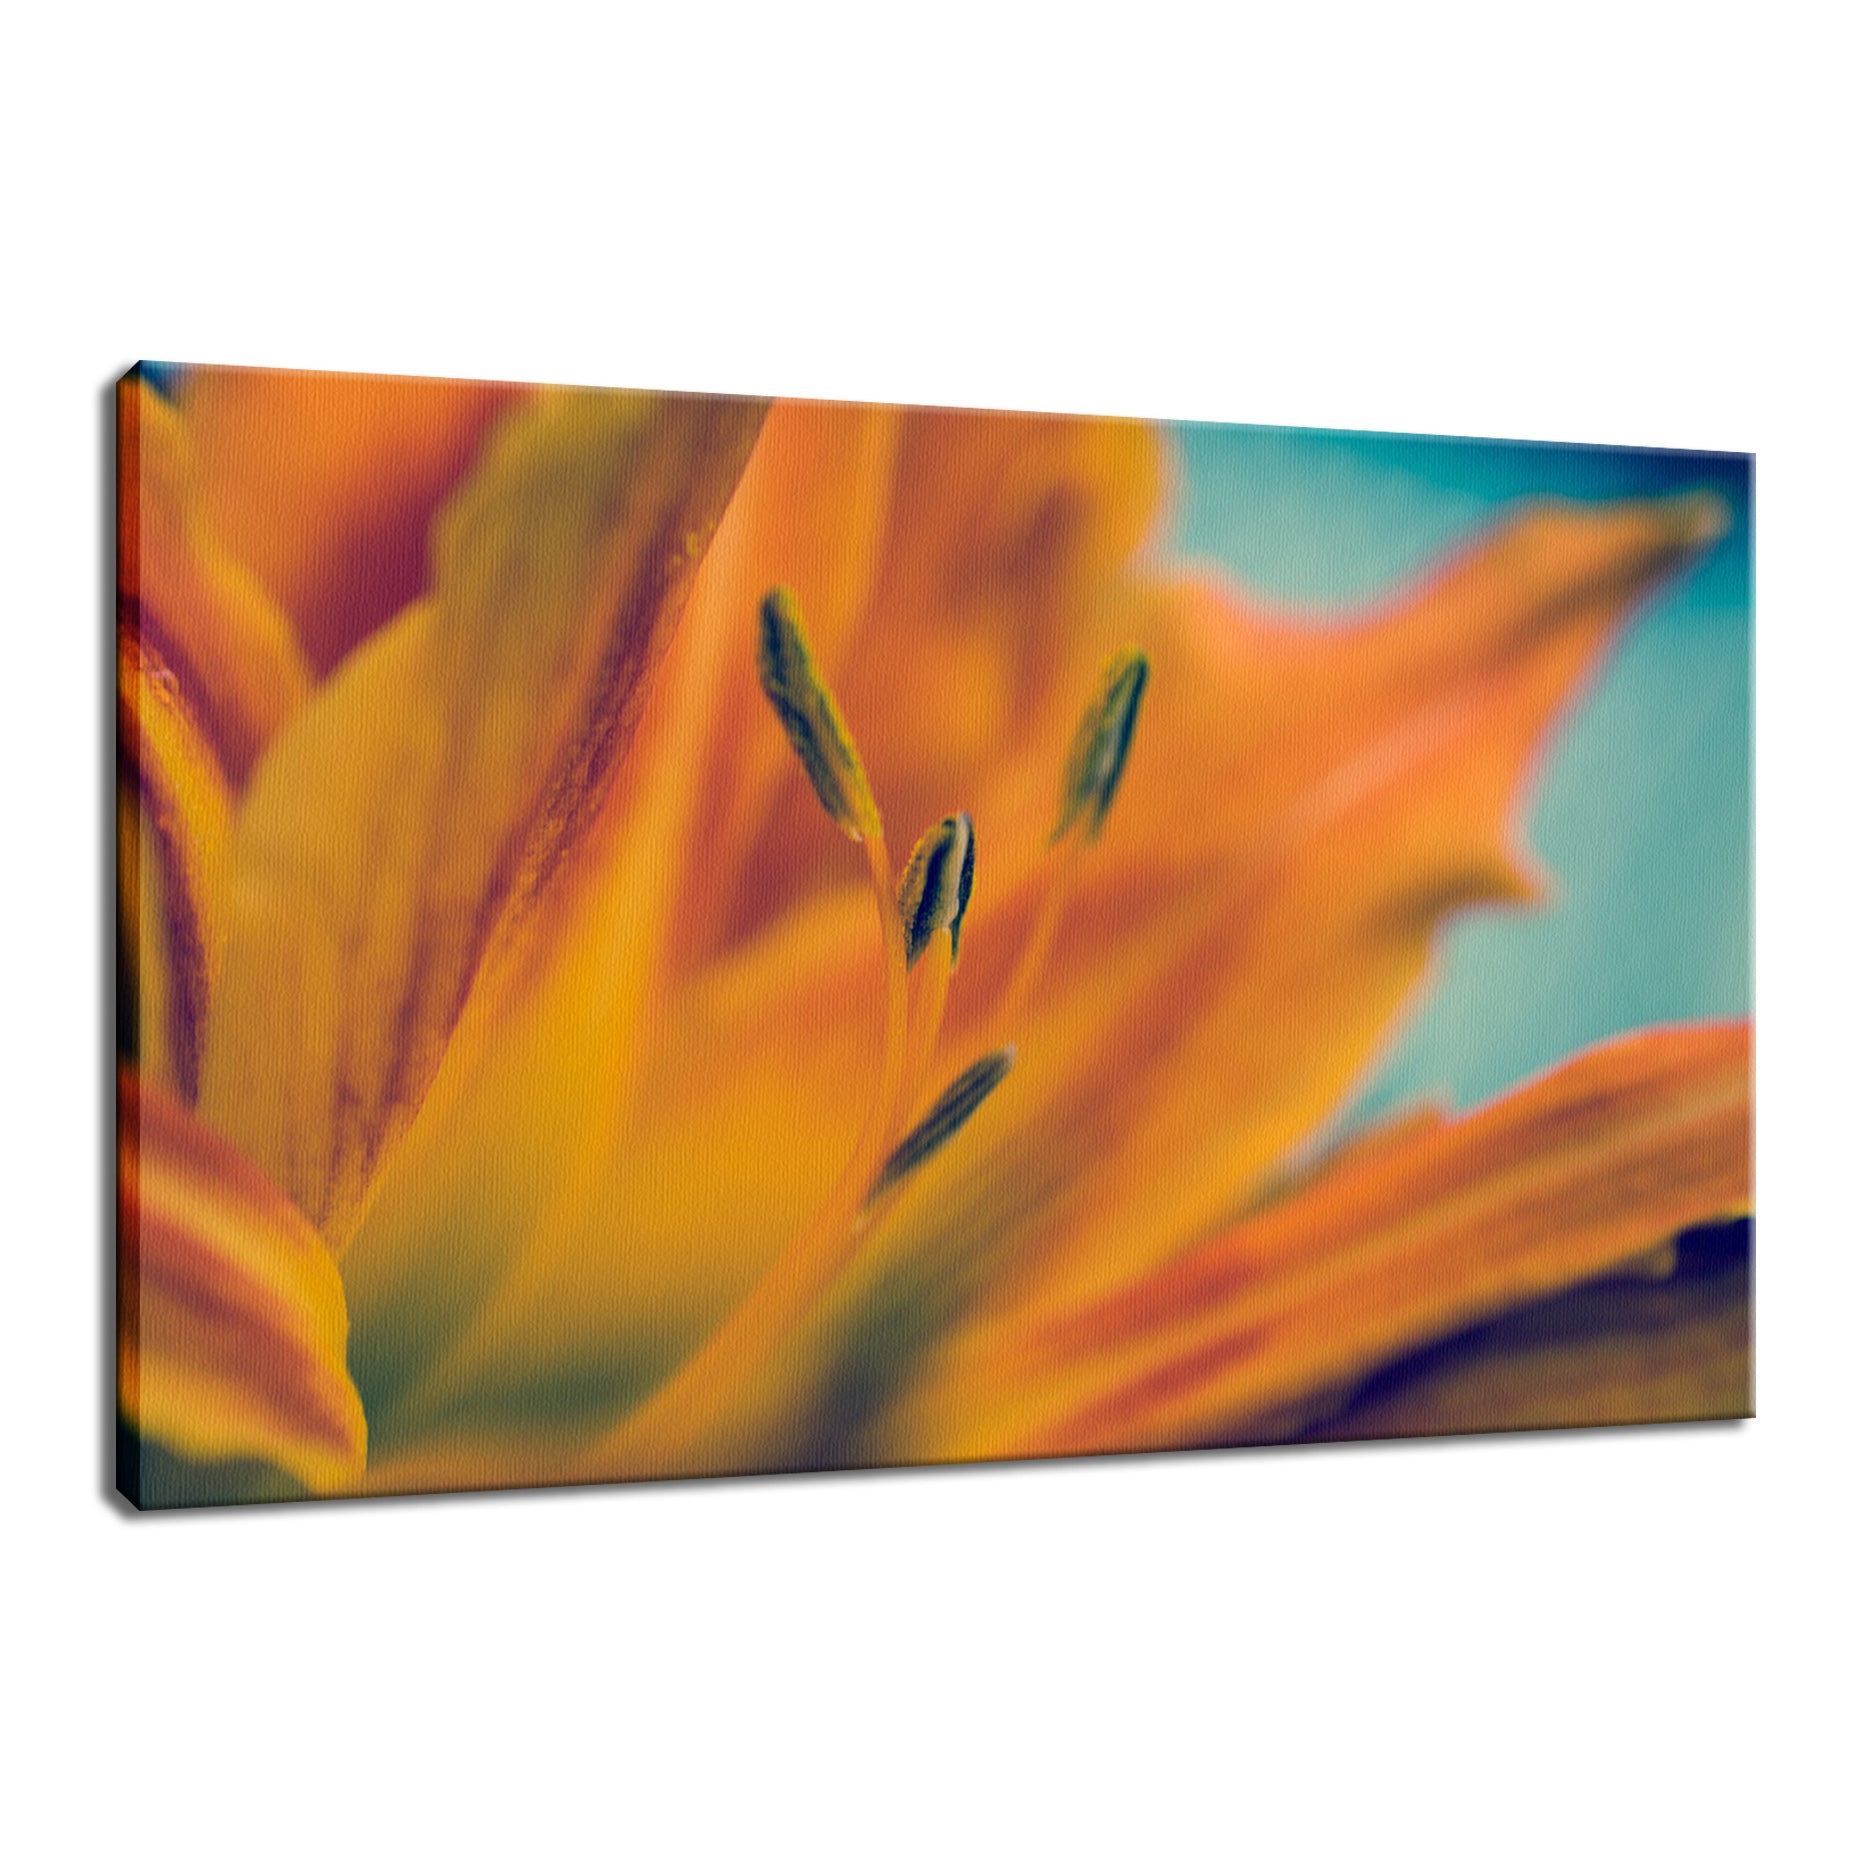 Mystical Tiger Lily Nature / Floral Photo Fine Art Canvas Wall Art Prints  - PIPAFINEART